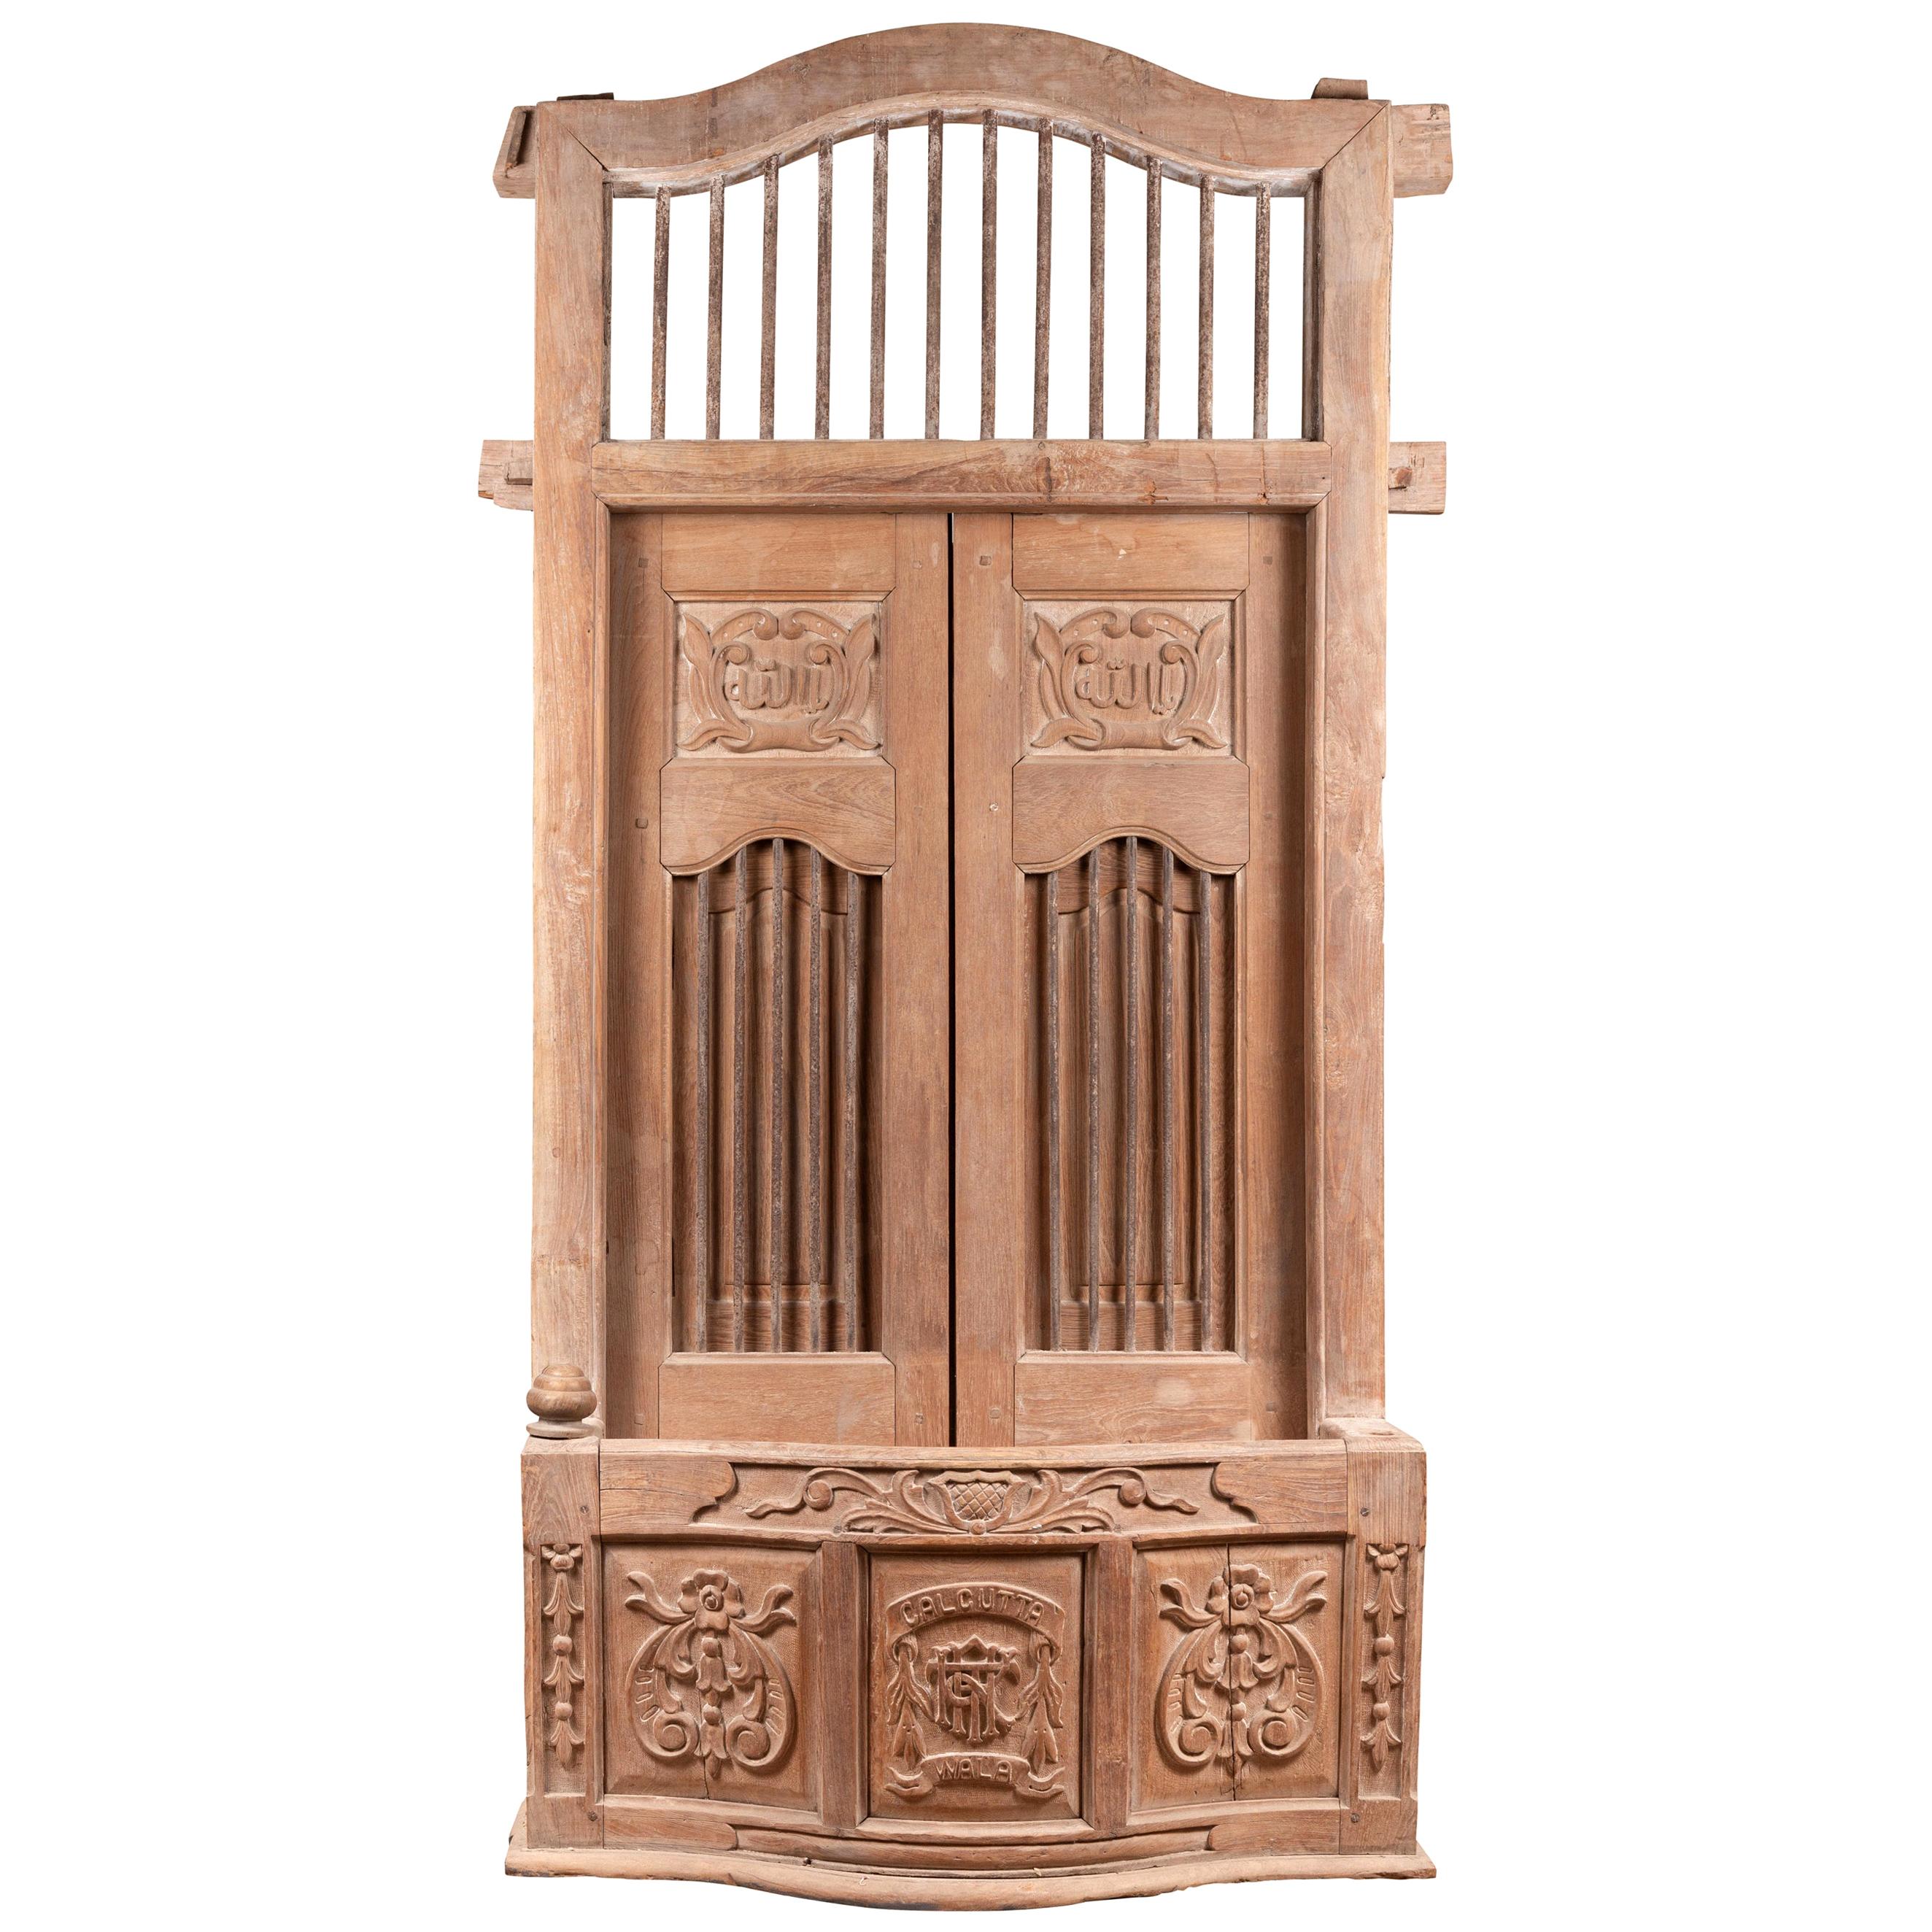 Large Natural Wood Window Balcony with Hand Carved Foliage Motifs and Bonnet Top